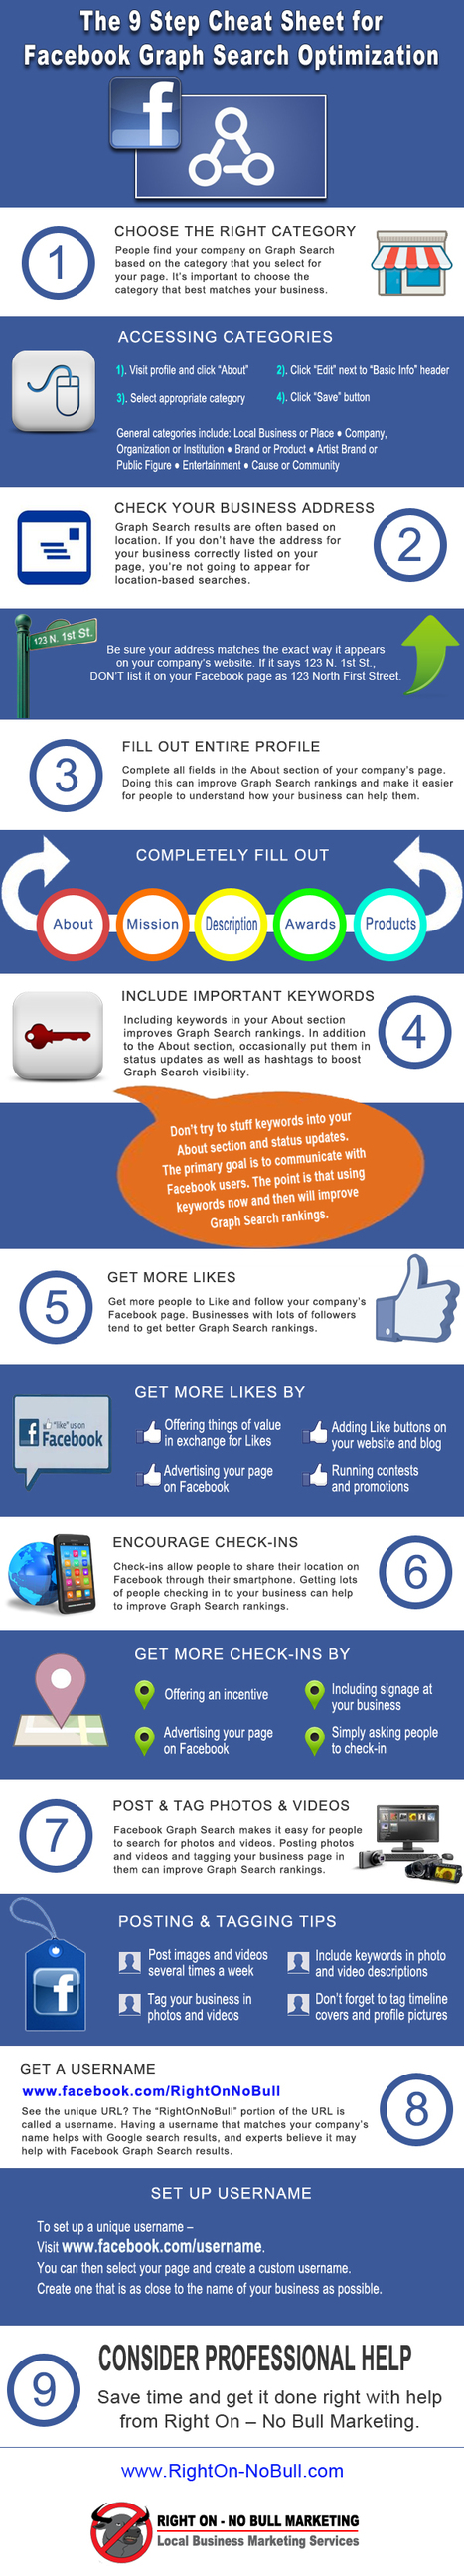 9 Steps for Facebook Graph Search Optimization [INFOGRAPHIC] | digital marketing strategy | Scoop.it